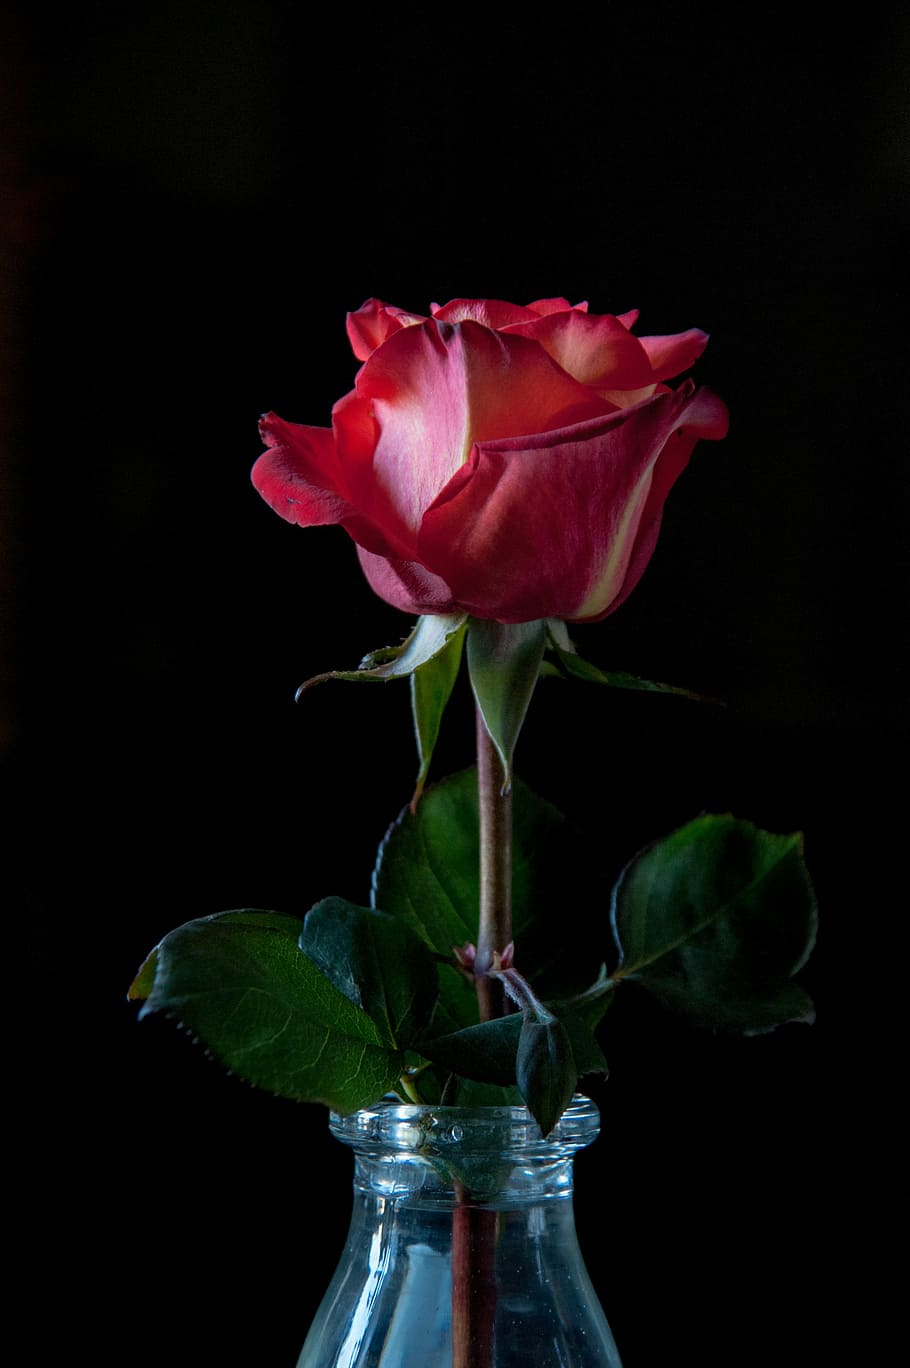 pink, rose, clear, glass vase, black background, petals, red rose, one rose, beautiful flower, closeup